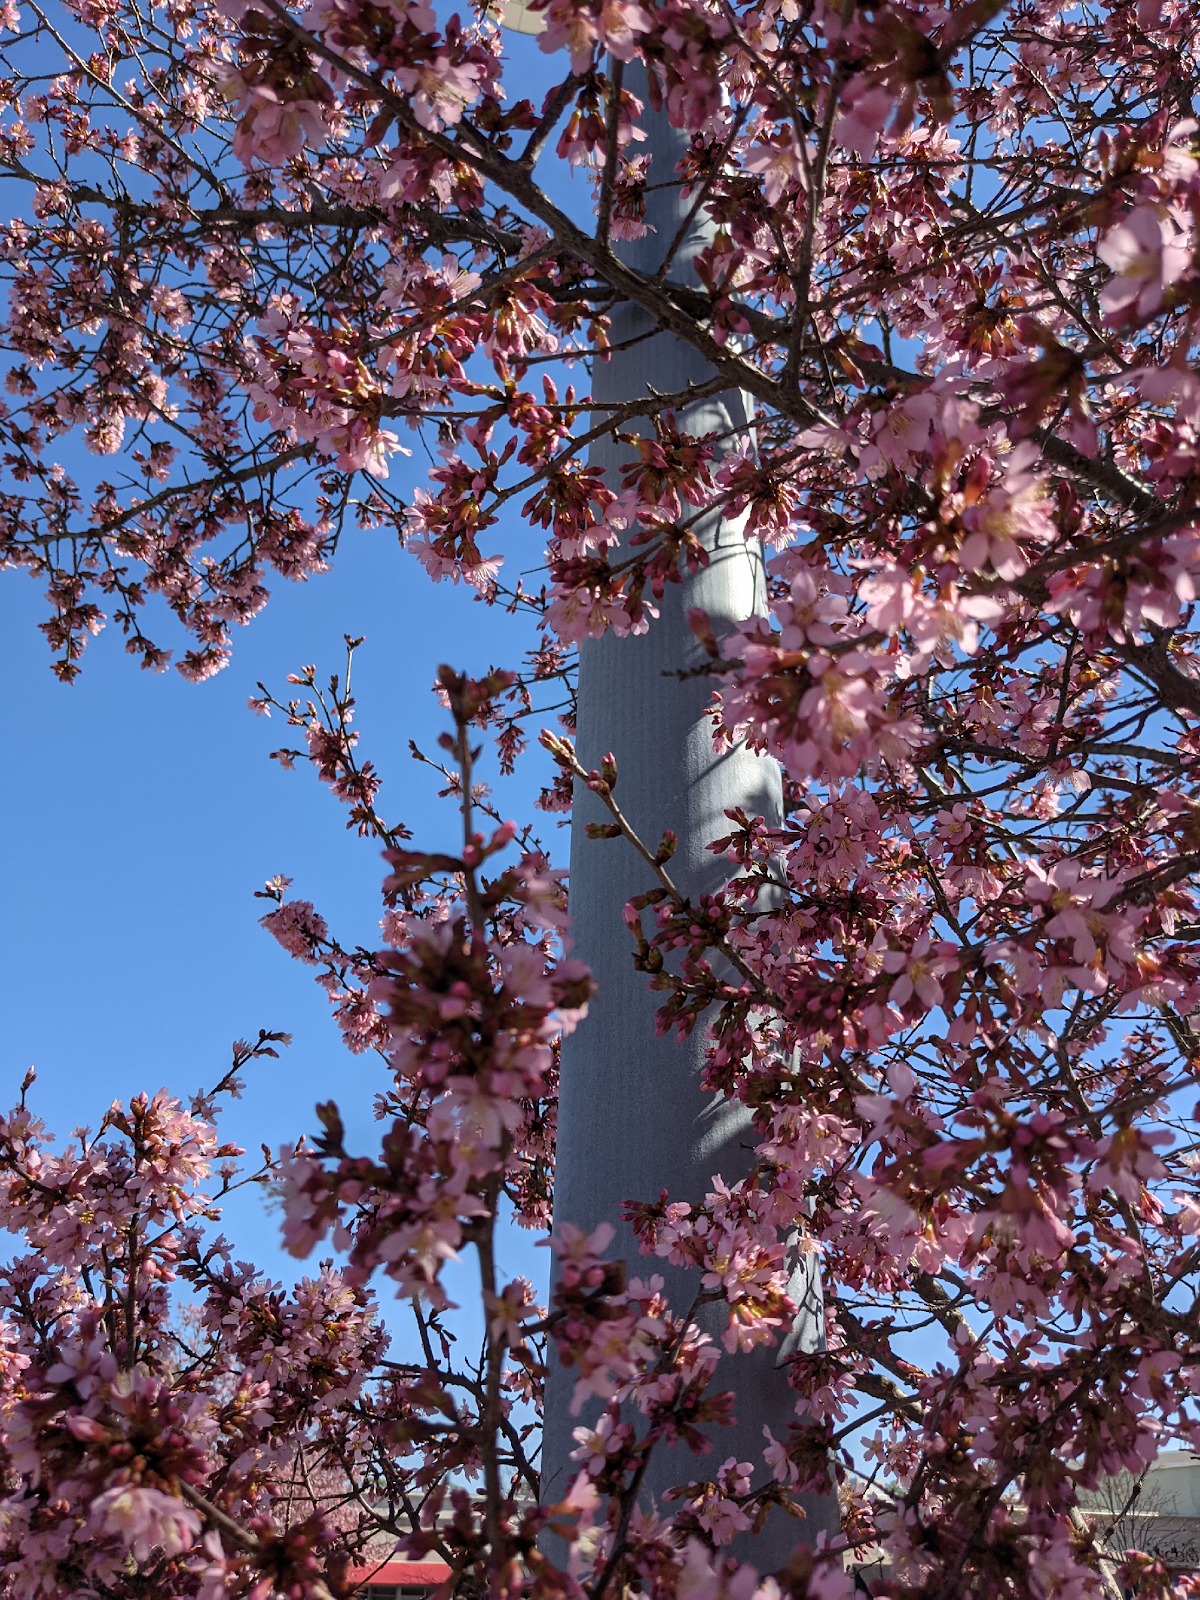 Best Cherry Blossom Spots In Raleigh!